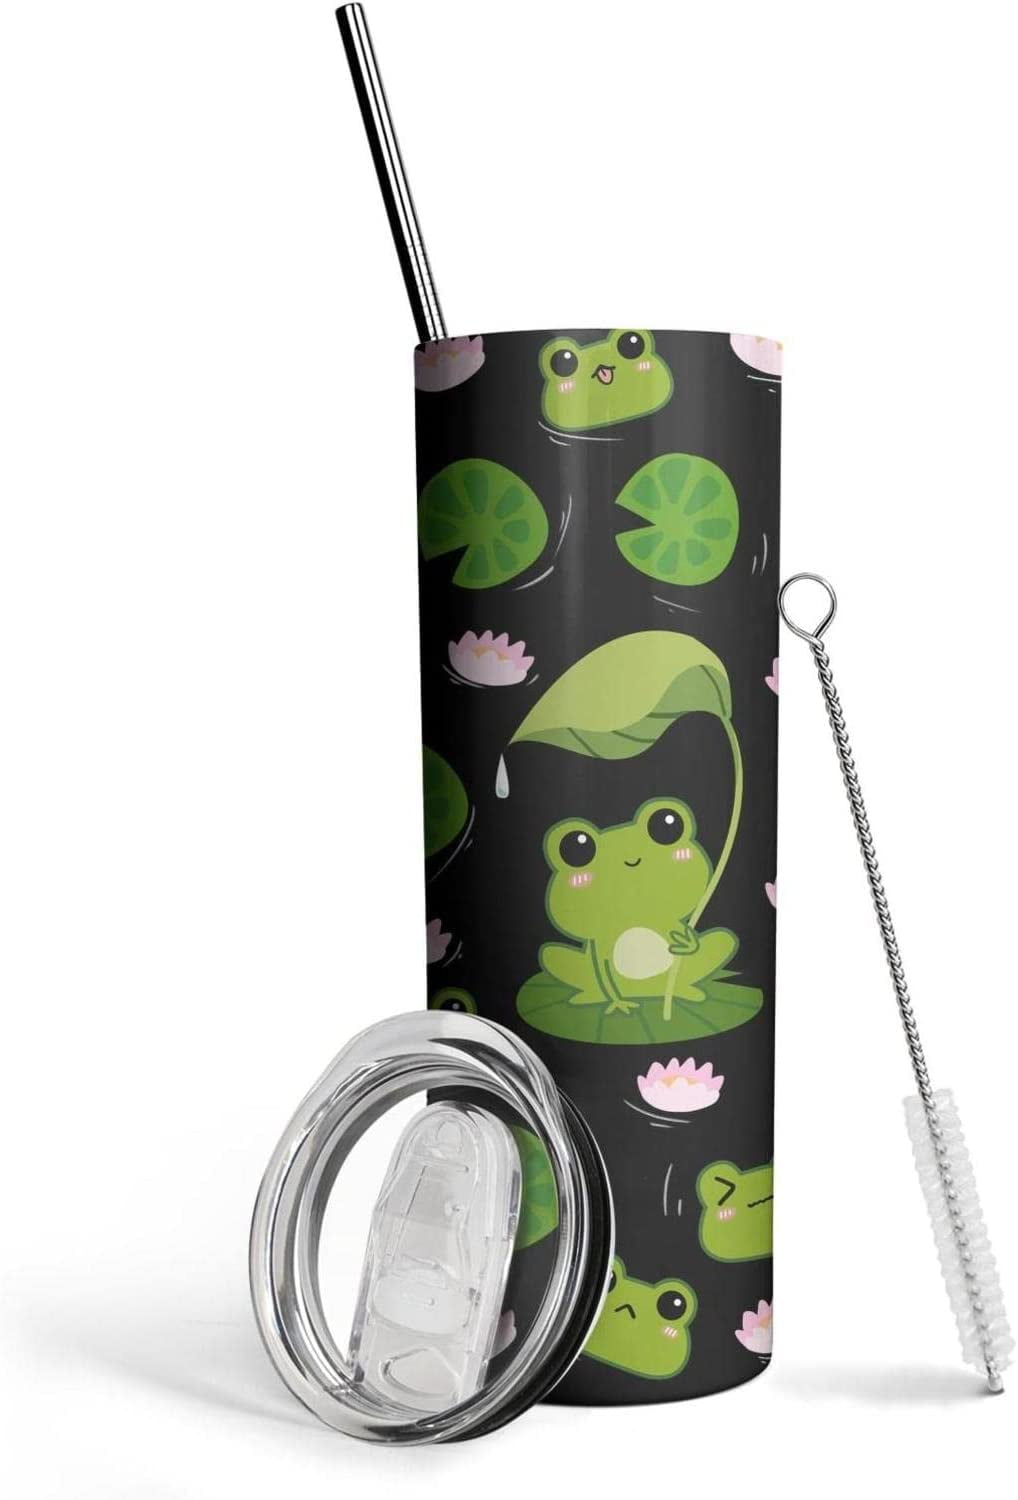 Frog Stuff-Frog Gifts for Women-Frog Cup/Coffee Mug/Water Bottle/Cute  Coffee Tumbler/Decor/Accessories/Things/Frog Gifts/ 20 Oz Tumbler with Lid  and Straw Frog Tumbler 